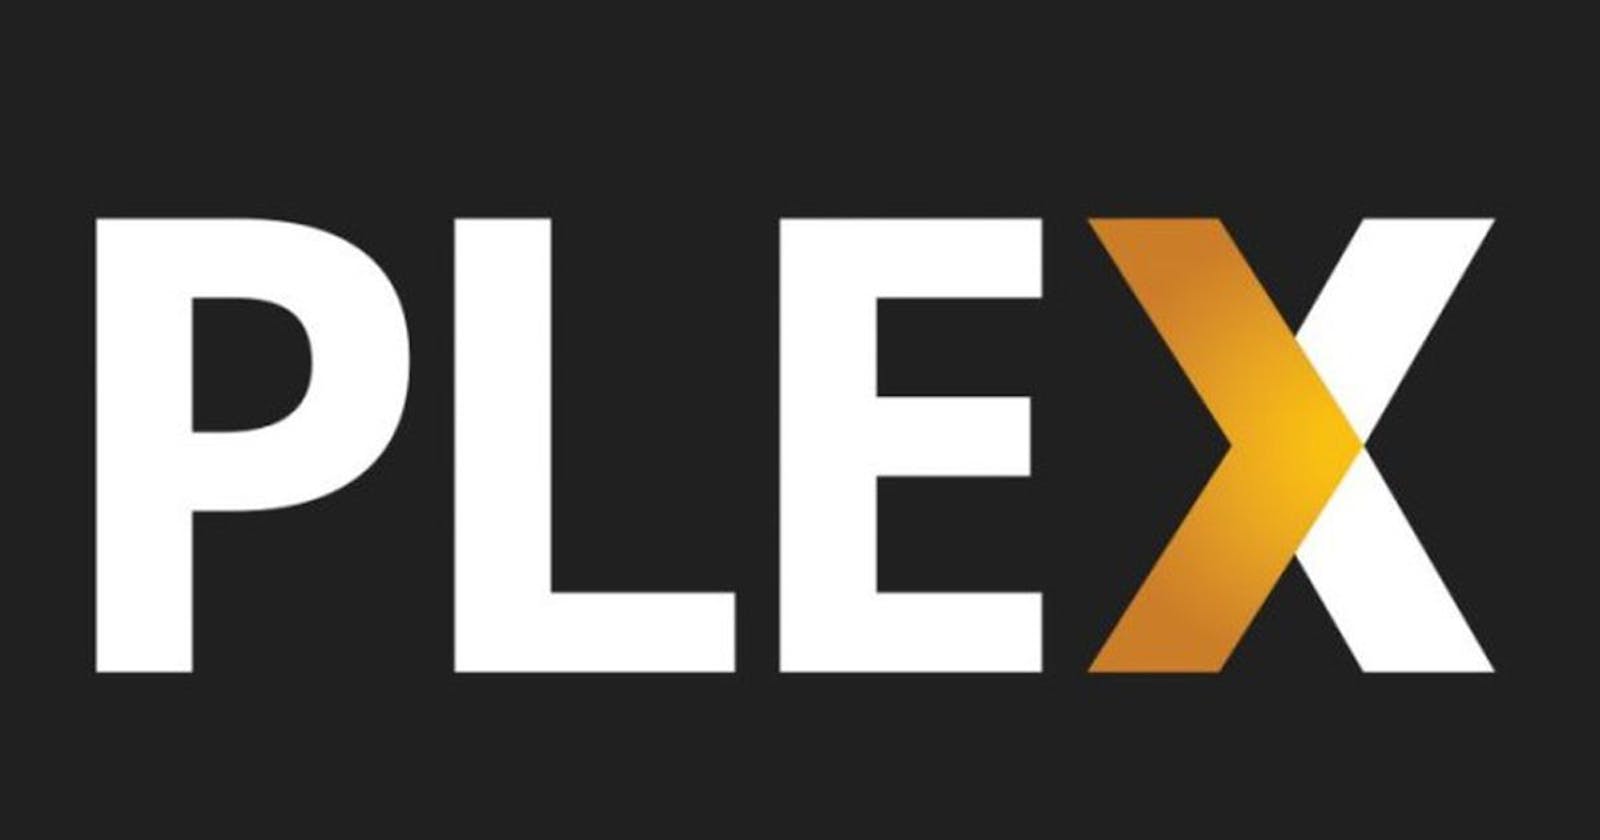 [UPDATED AGAIN] Full guide on making a Plex server with automated torrent downloads using Docker